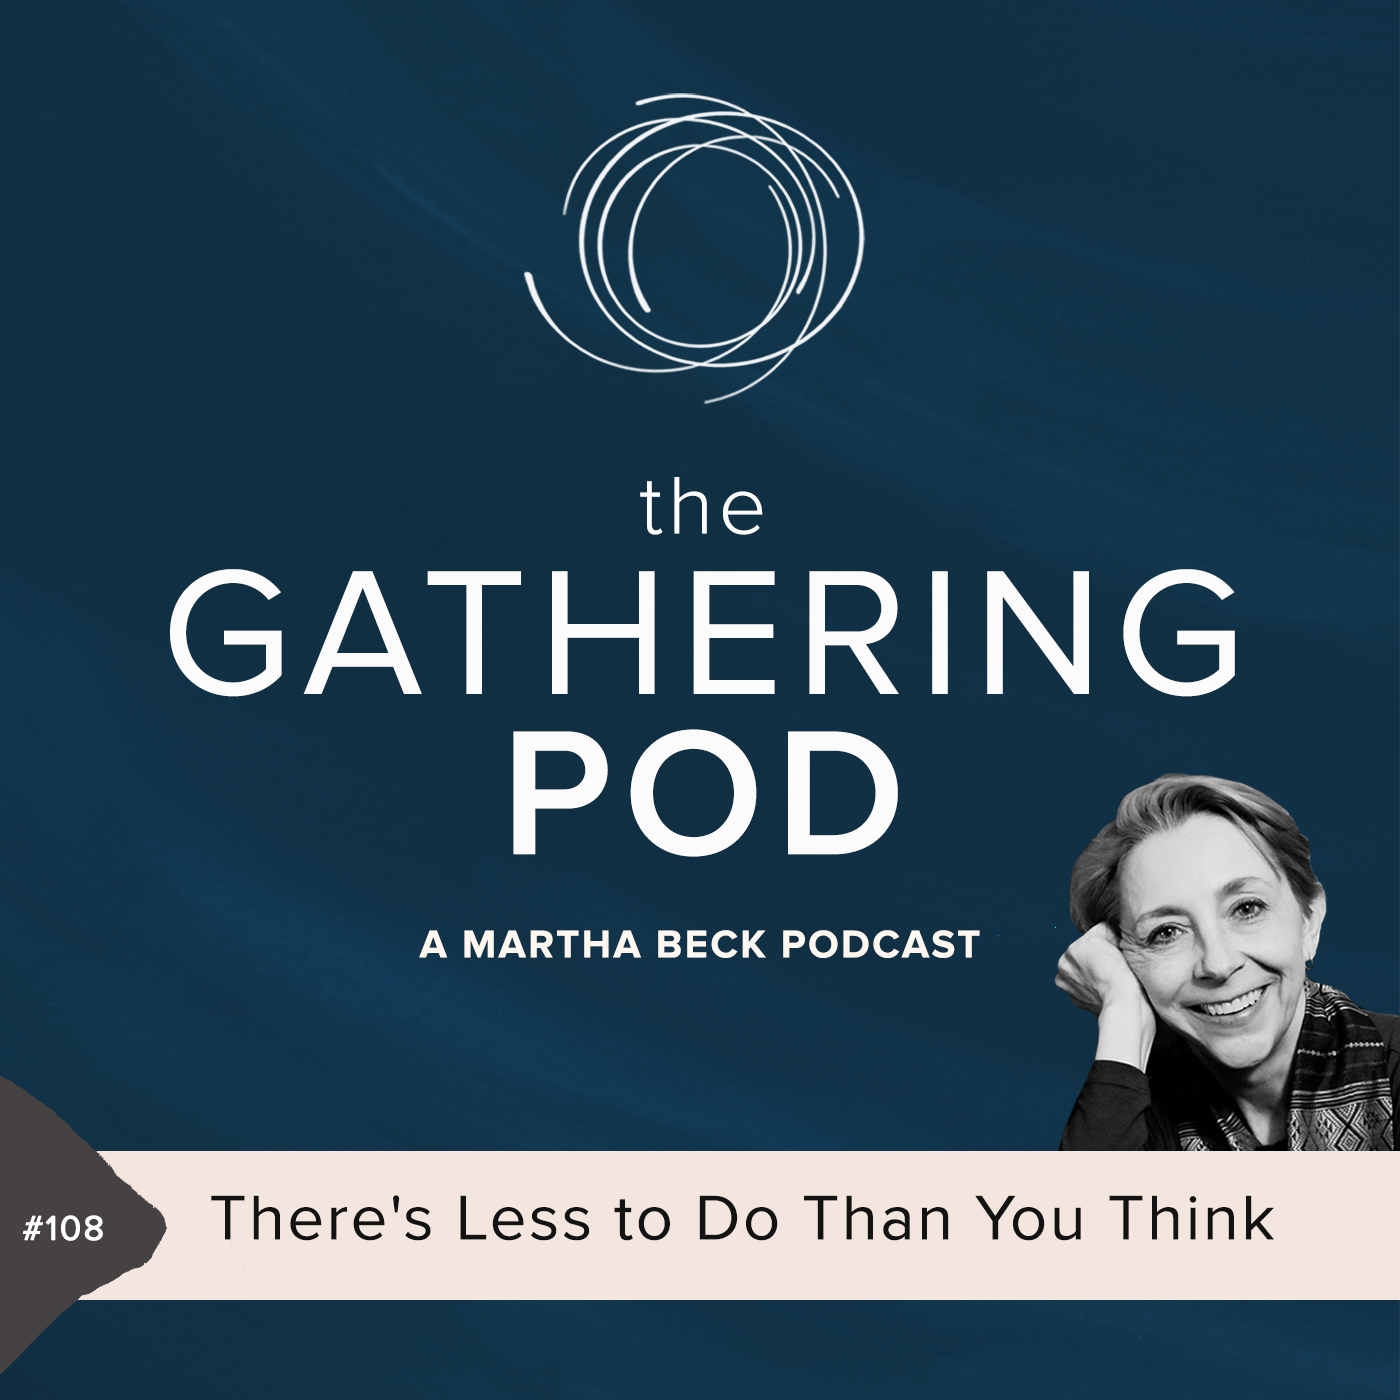 Image for The Gathering Pod A Martha Beck Podcast Episode #108 There’s Less to Do Than You Think